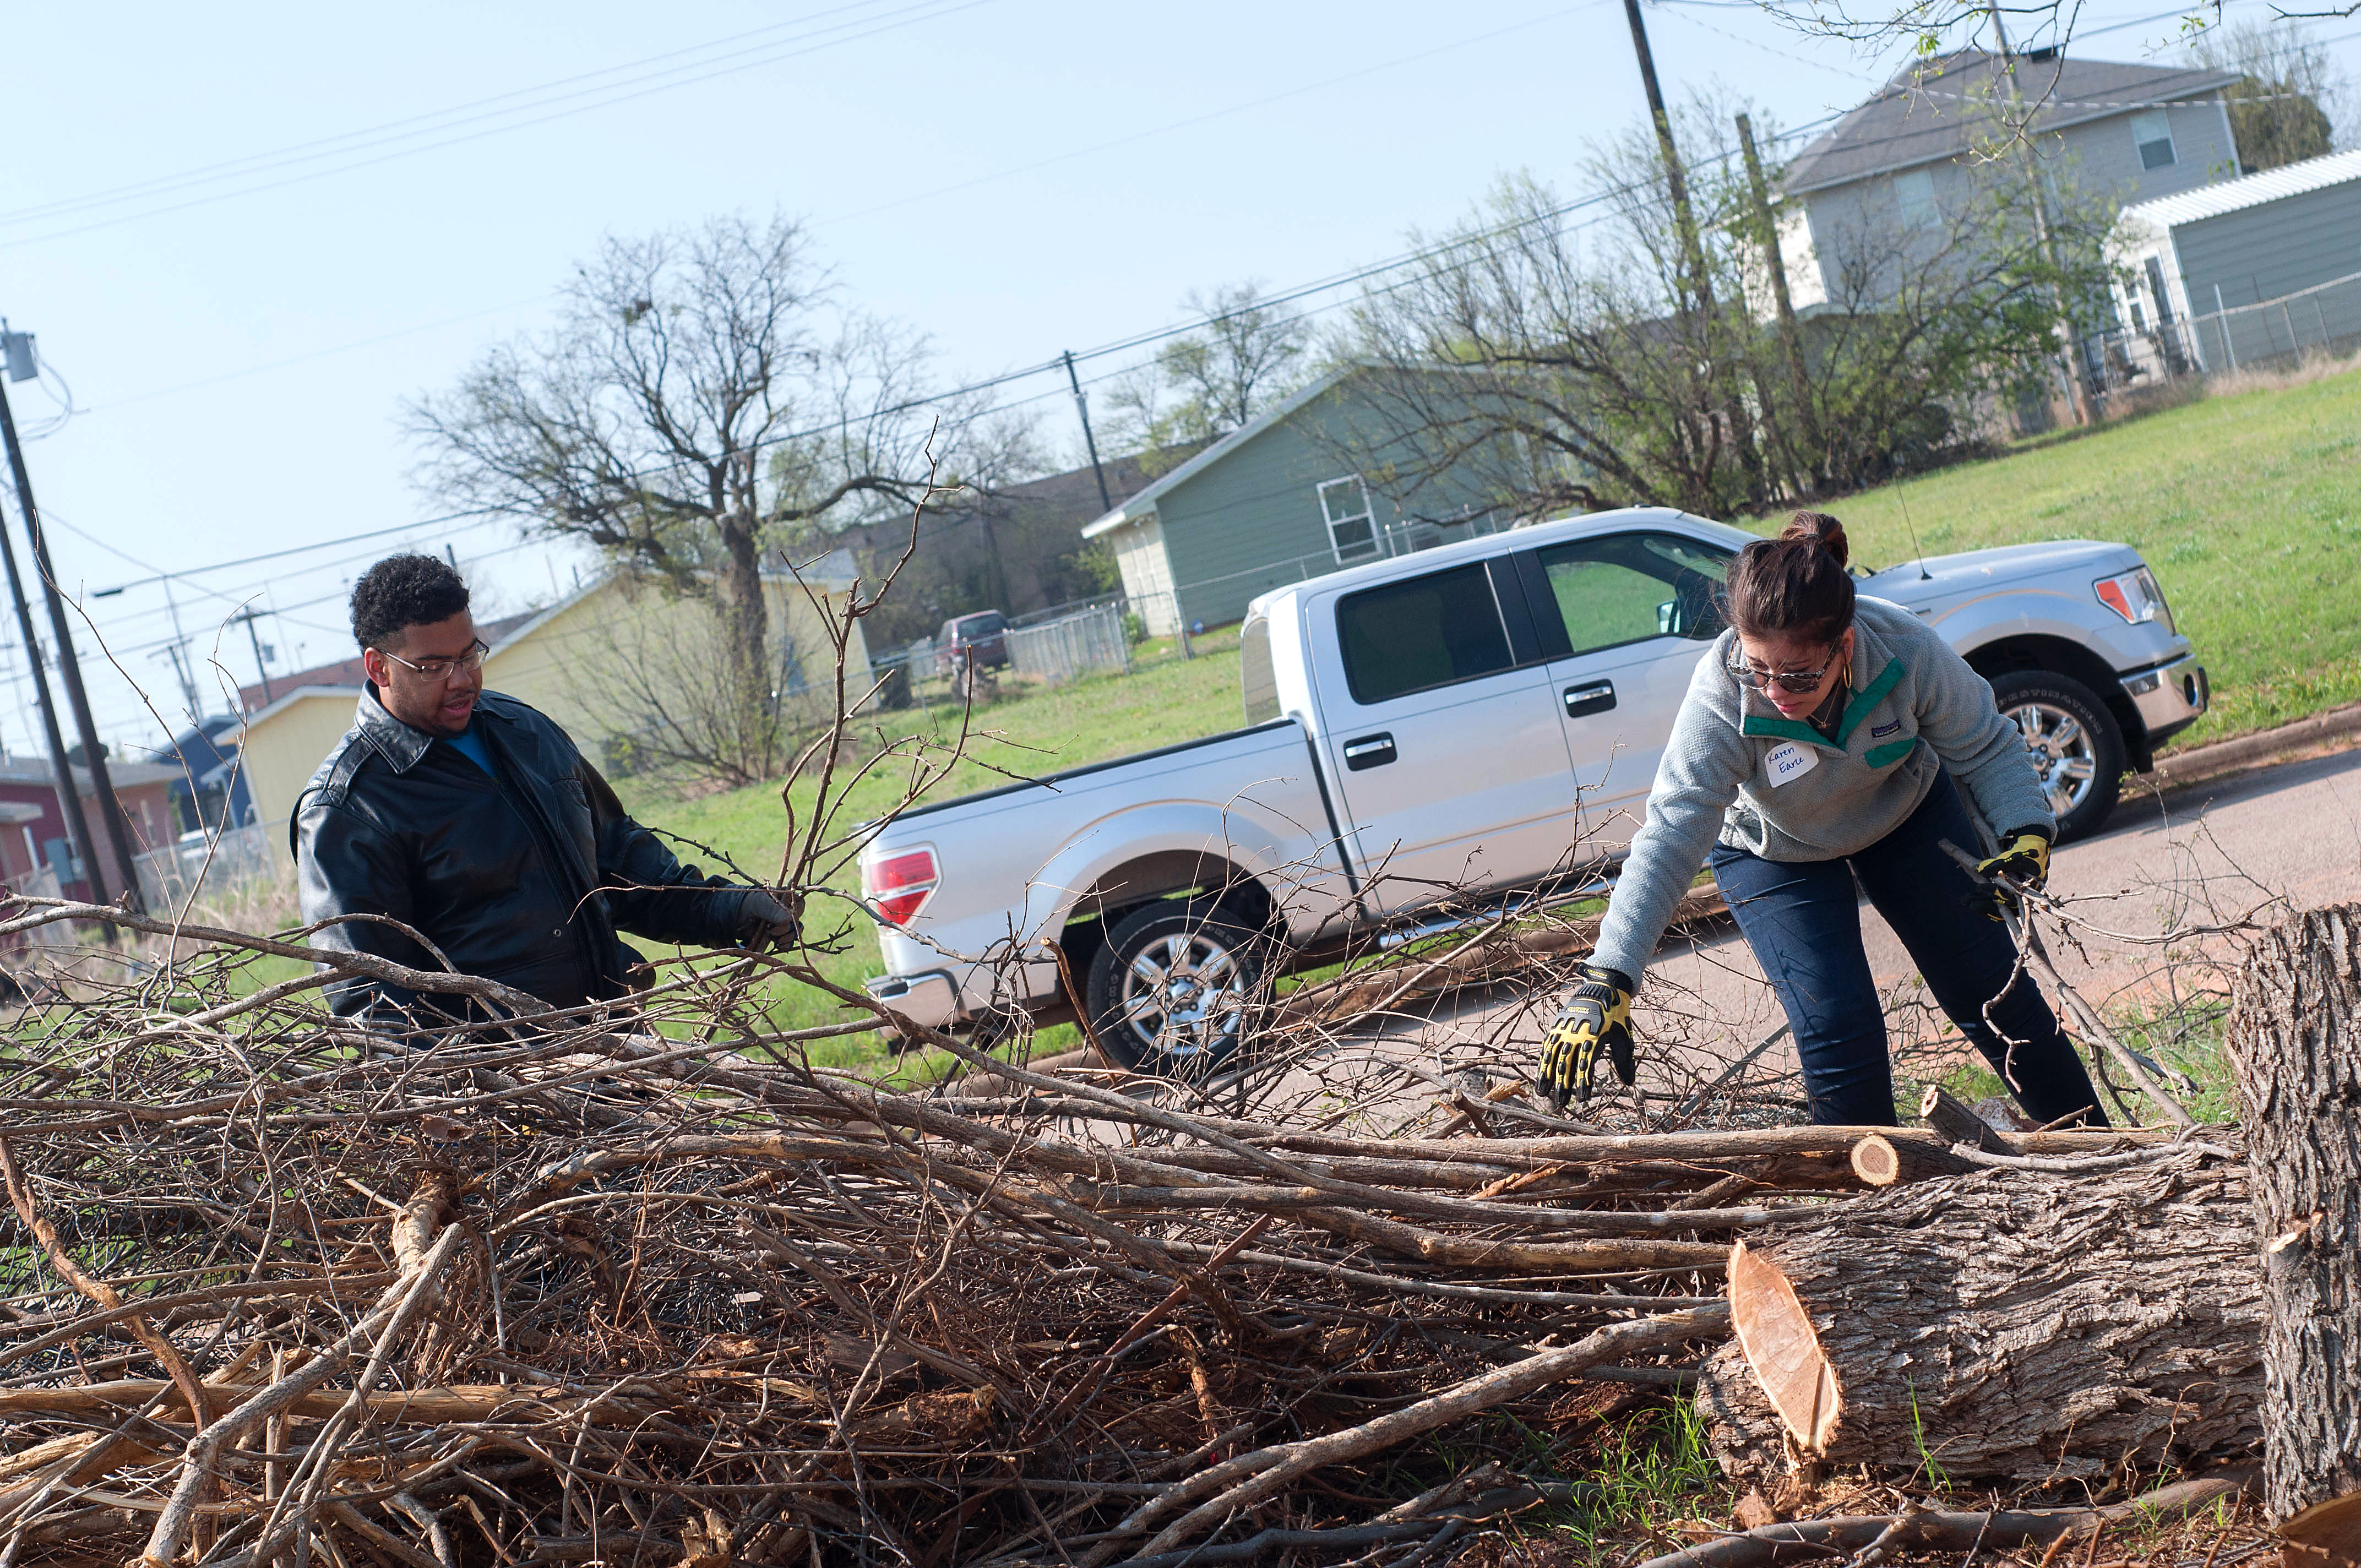 Two students cleaning up a Habitat for Humanity lot after a tree was cut down, pulling at branches and logs